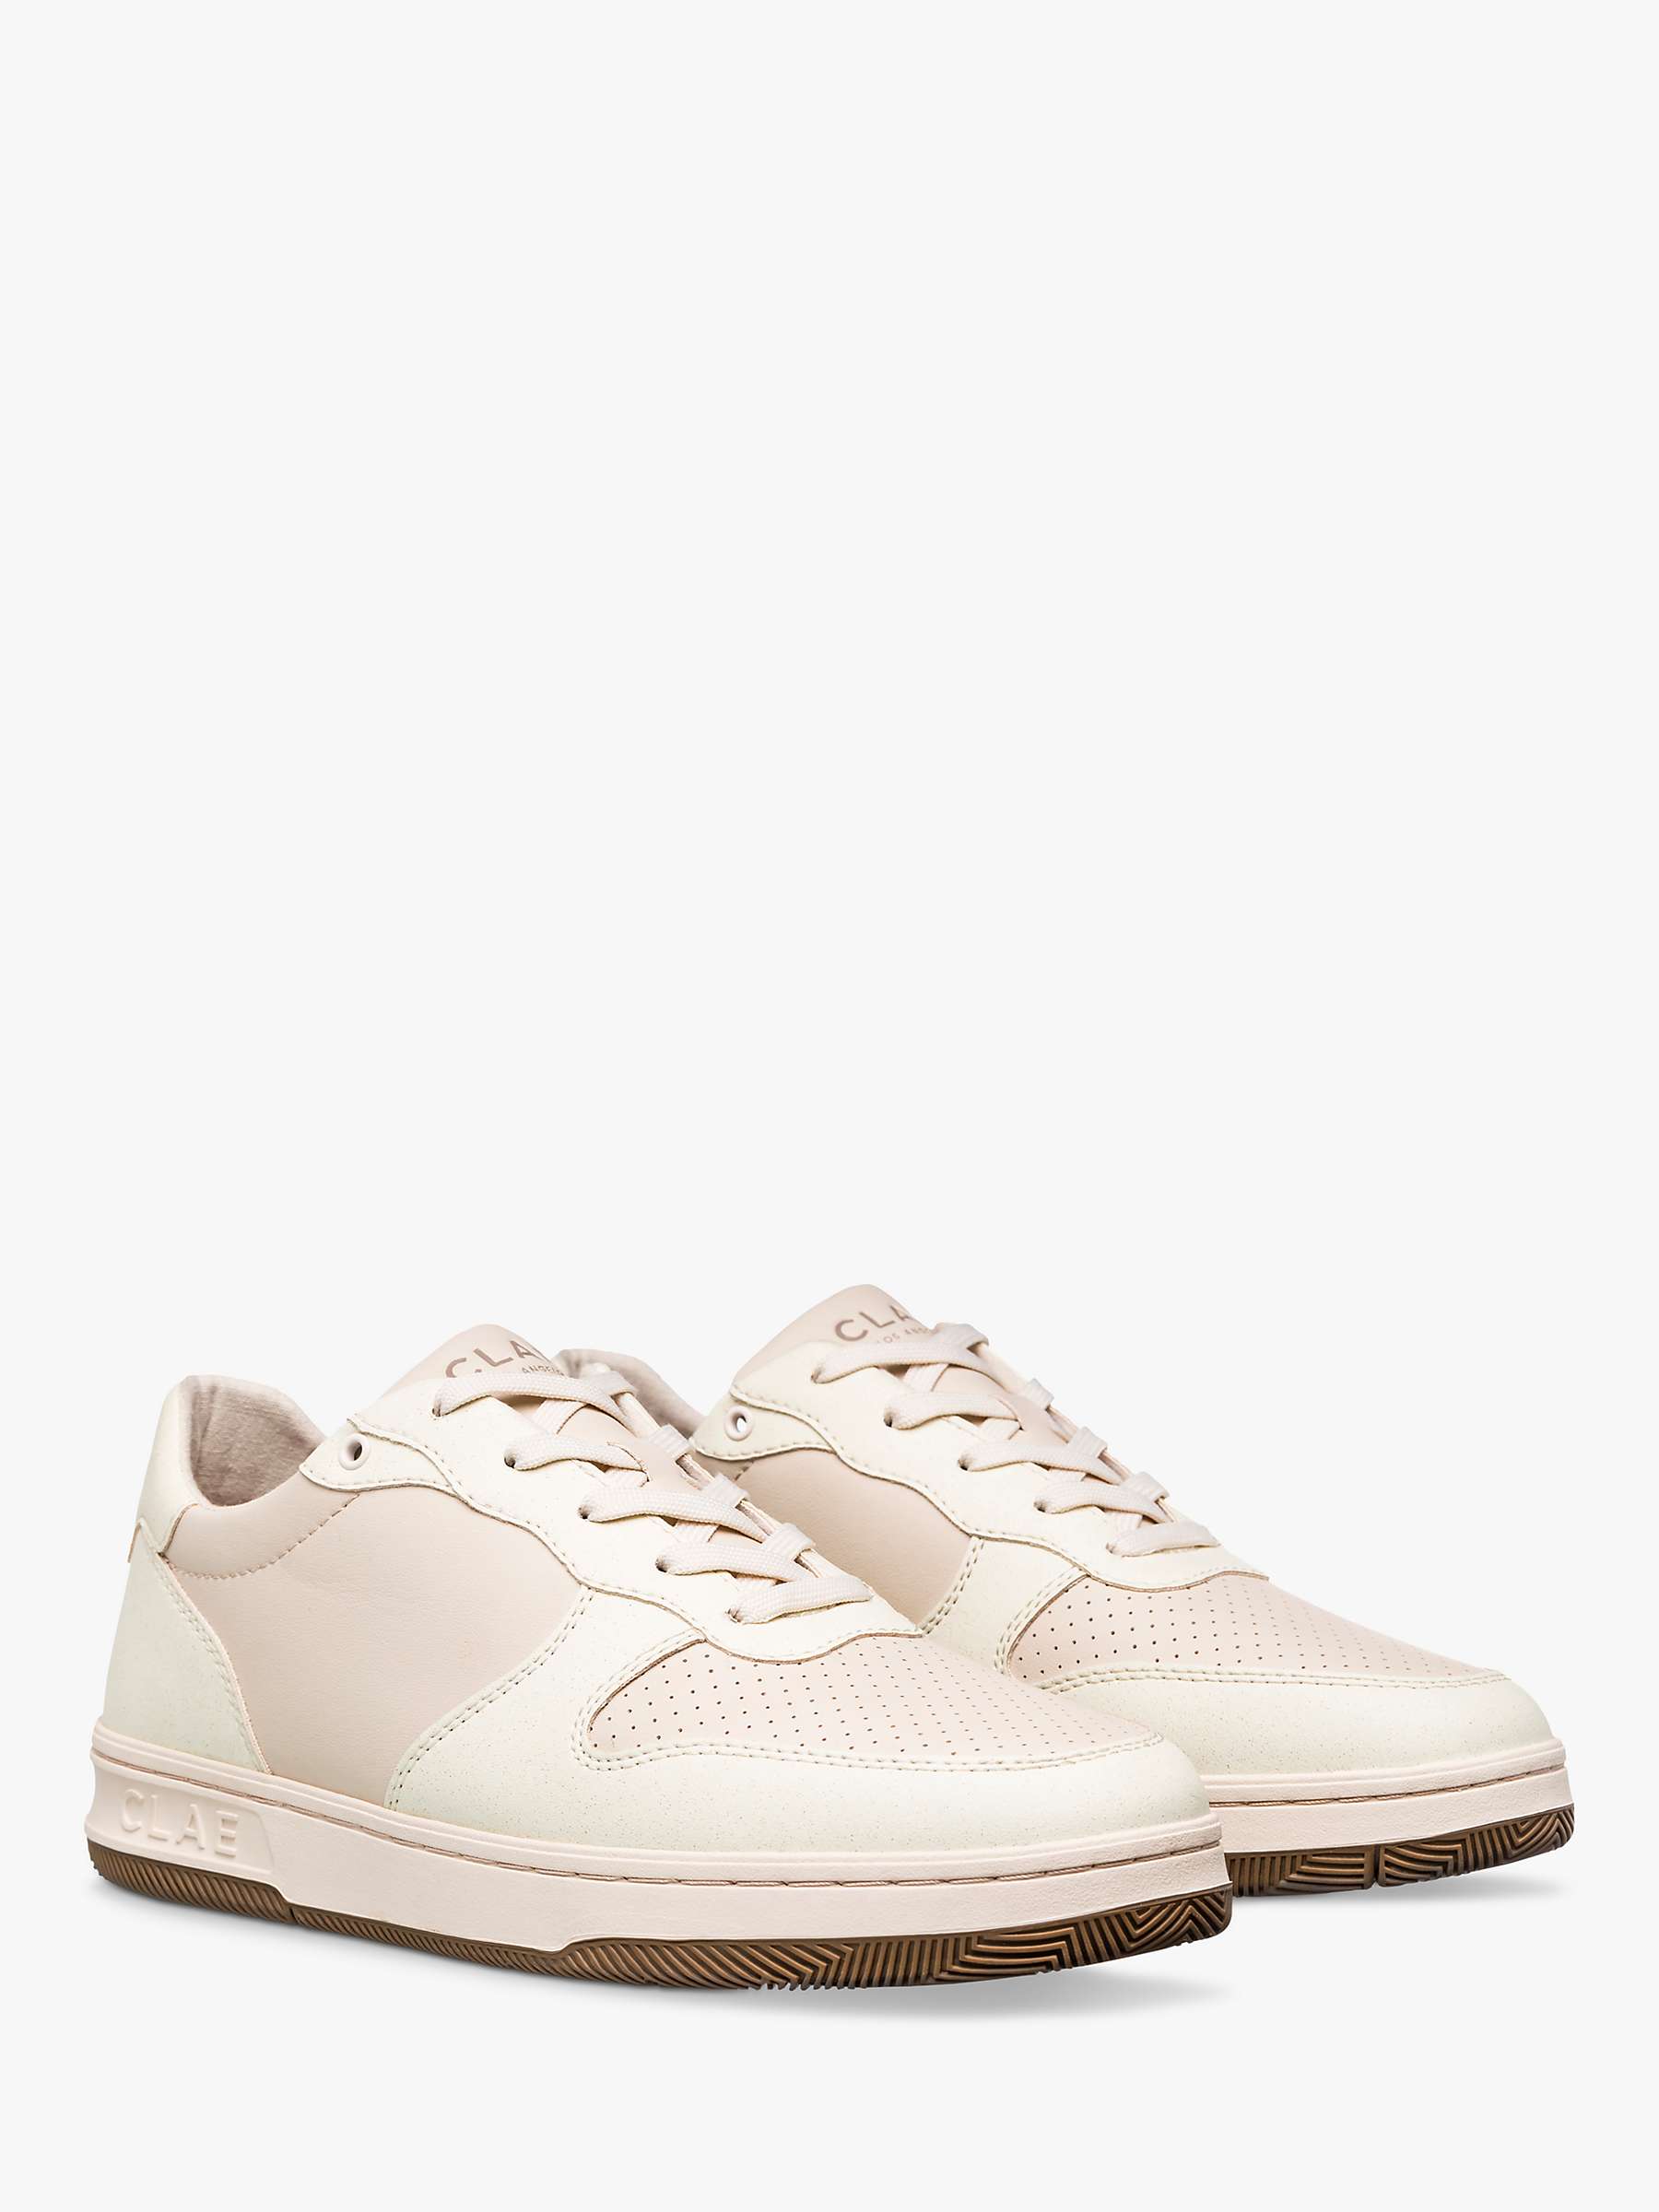 Buy CLAE Malone Apple Low Top Trainers Online at johnlewis.com